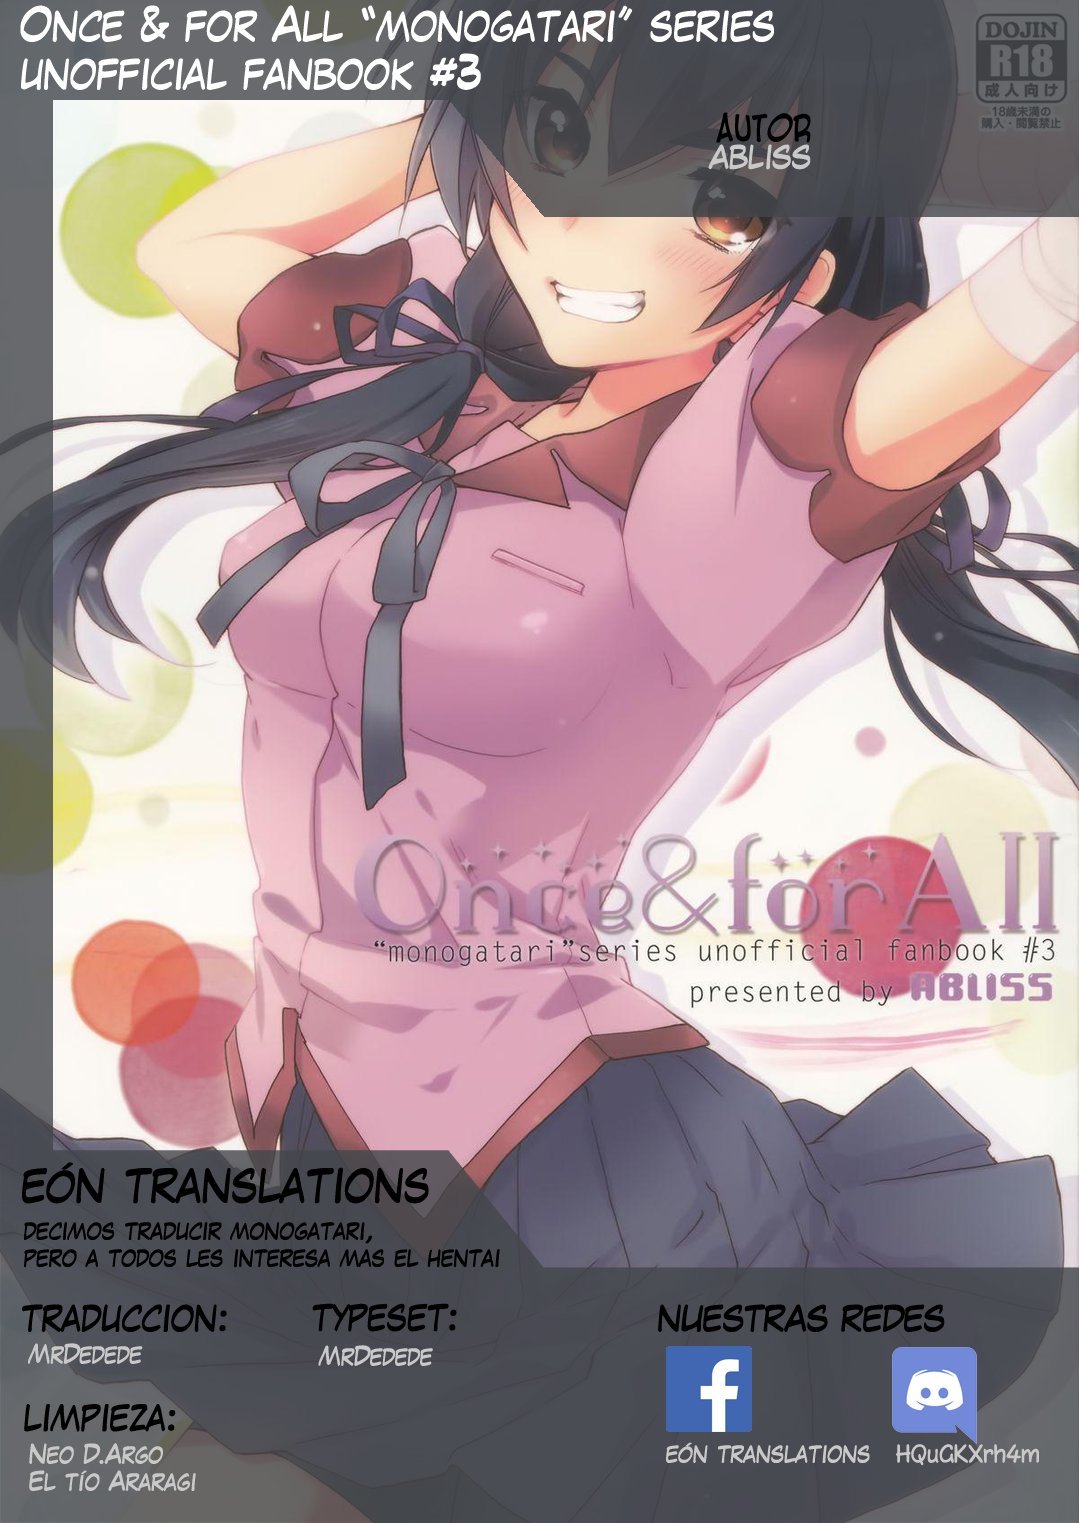 Once And For All Monogatari Series Unofficial Fanbook #3 - 21